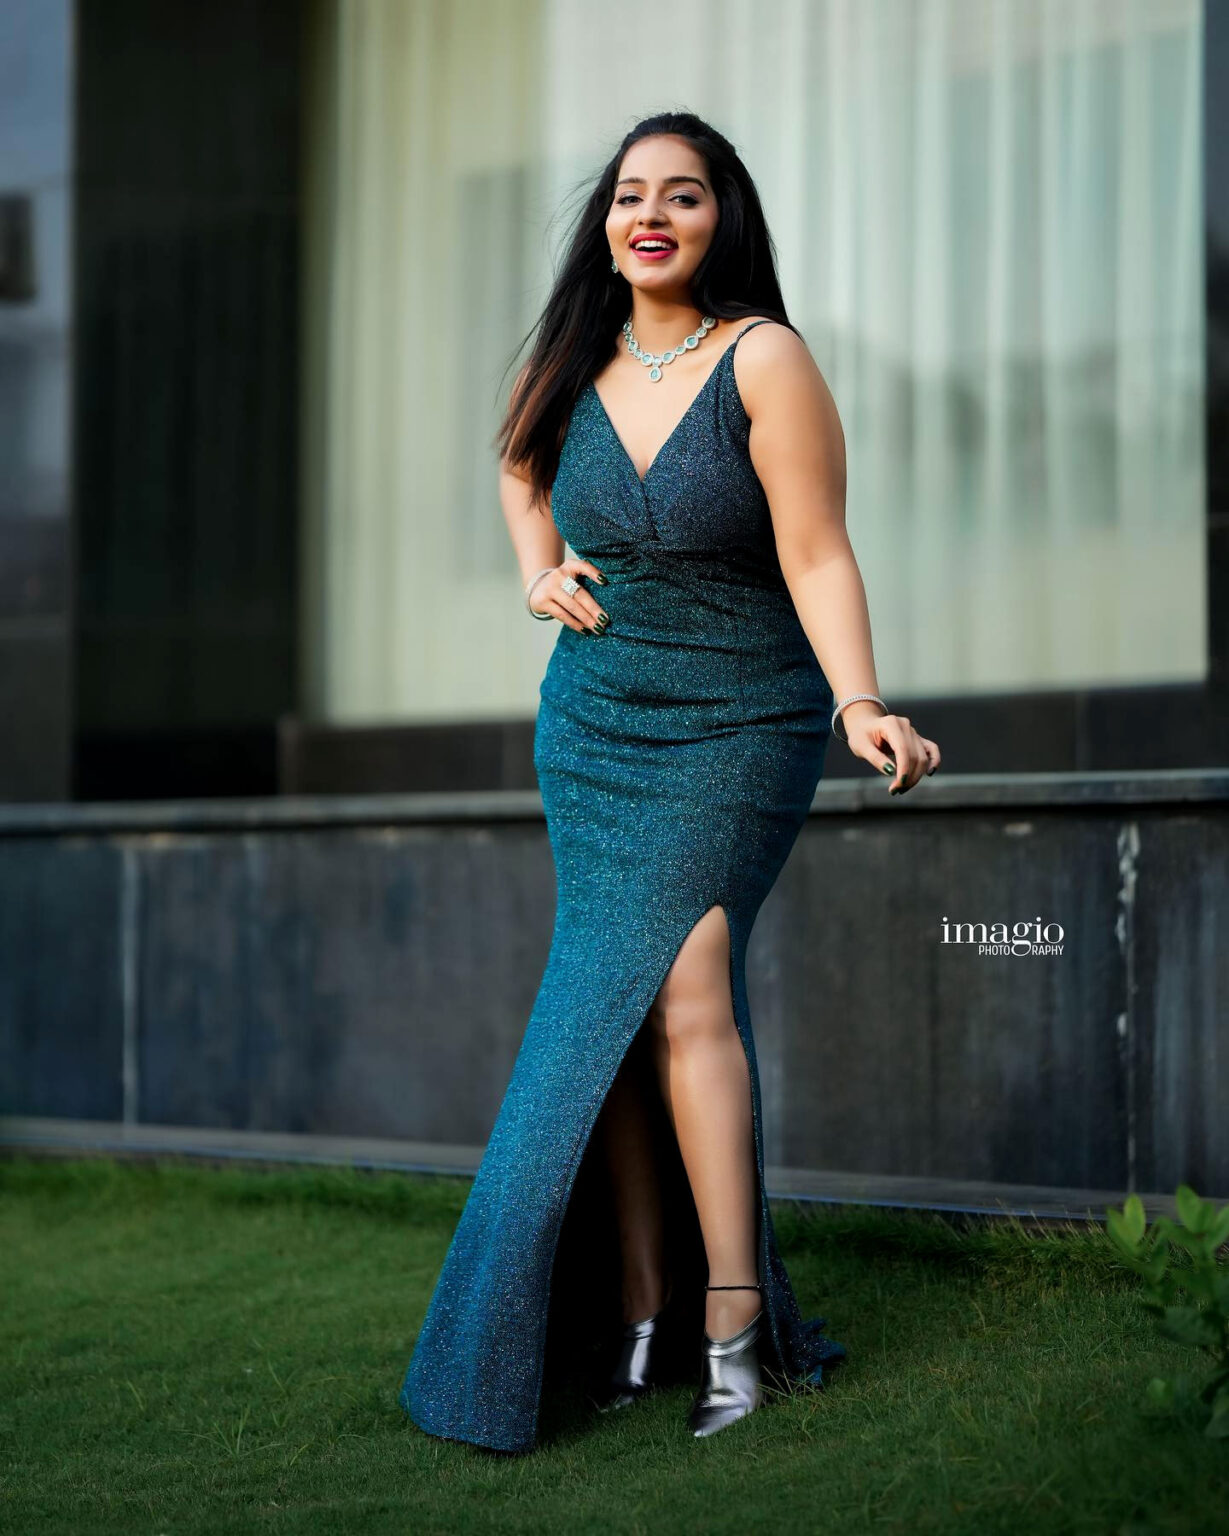 Malavika Menon sizzles in bodycon gown - South Indian Actress